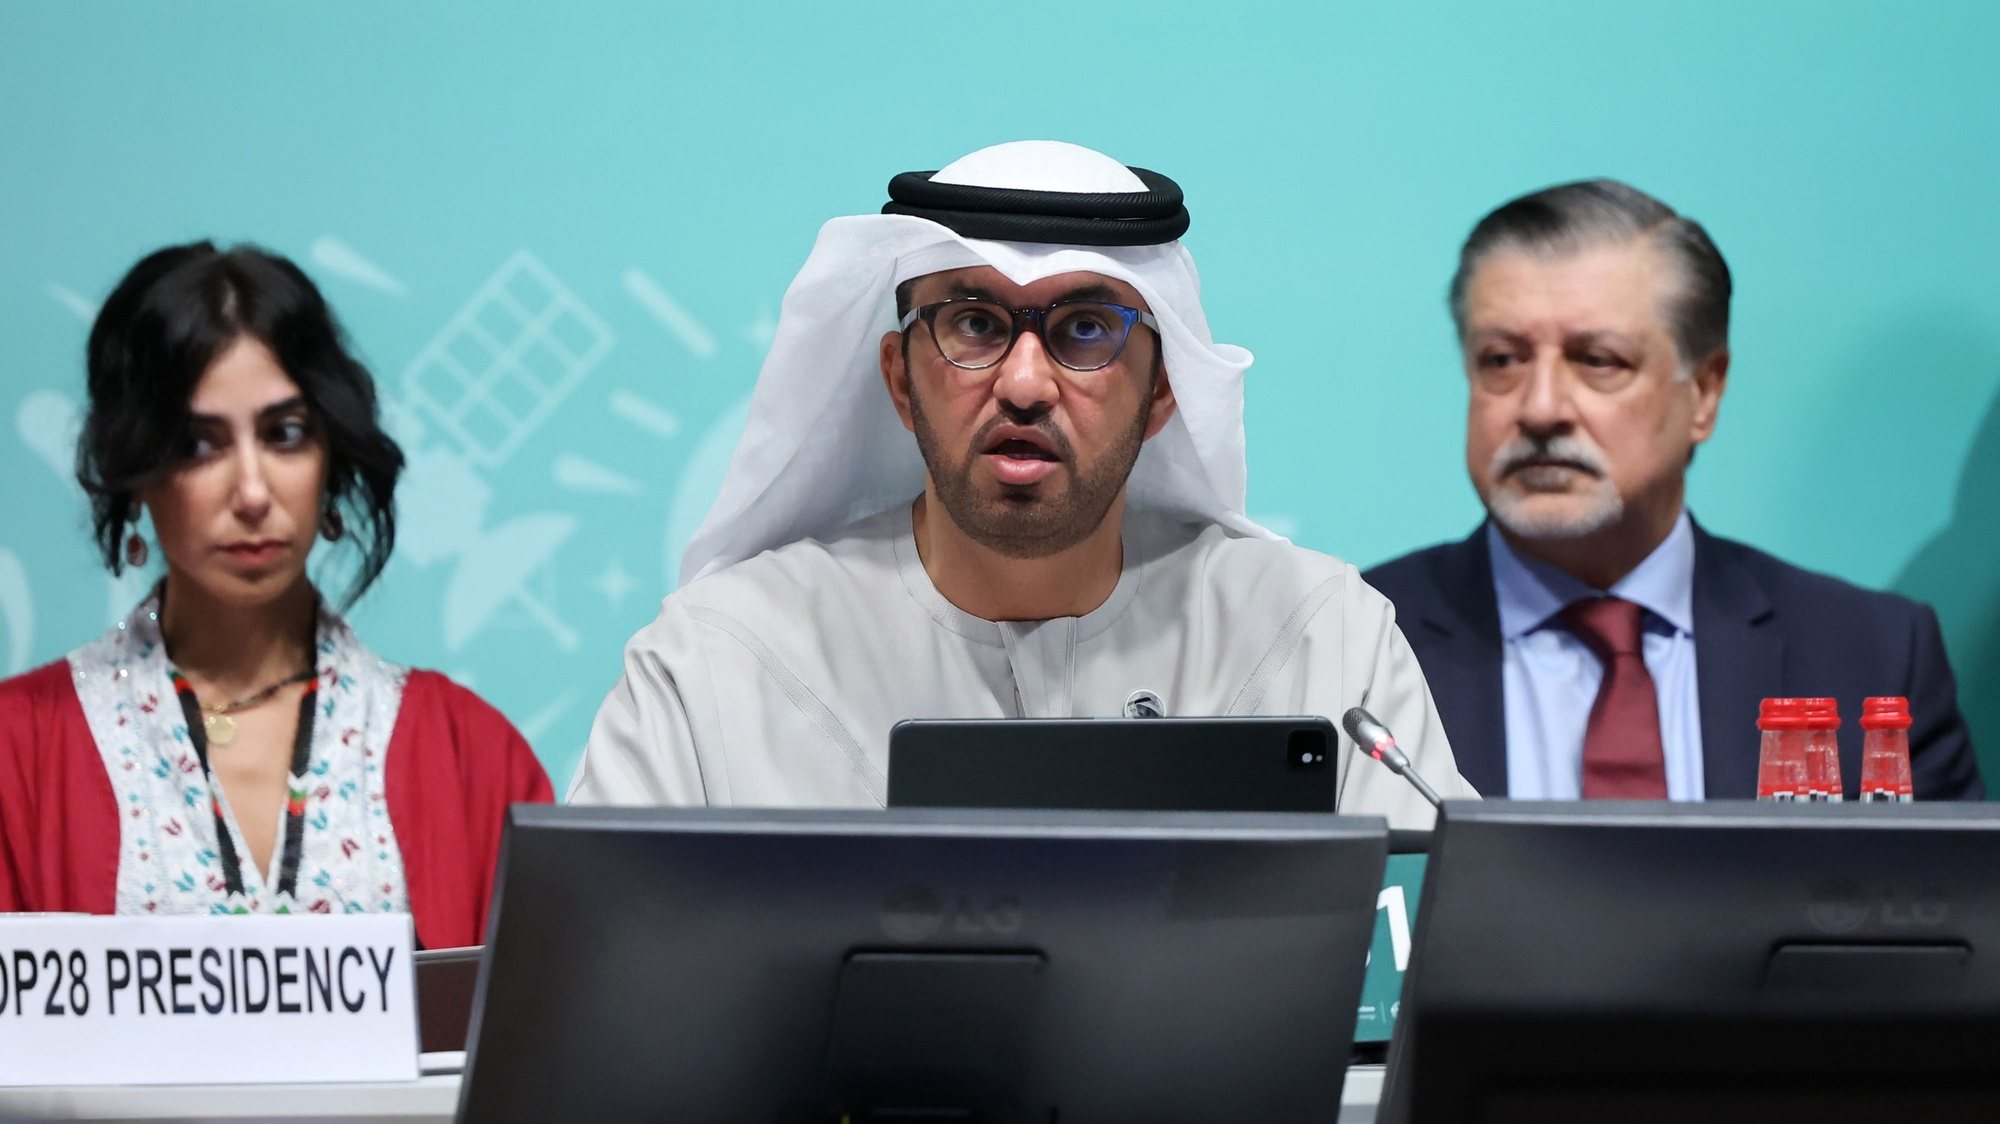 epa11006725 Dr. Sultan Ahmed Al Jaber, President-Designate of COP28 and UAE&#039;s Minister for Industry and Advanced Technology, attends a session during the third day of the 2023 United Nations Climate Change Conference (COP28) at Expo City Dubai in Dubai, UAE, 02 December 2023. The 2023 United Nations Climate Change Conference (COP28), runs from 30 November to 12 December, and is expected to host one of the largest number of participants in the annual global climate conference as over 70,000 estimated attendees, including the member states of the UN Framework Convention on Climate Change (UNFCCC), business leaders, young people, climate scientists, Indigenous Peoples and other relevant stakeholders will attend.  EPA/ALI HAIDER